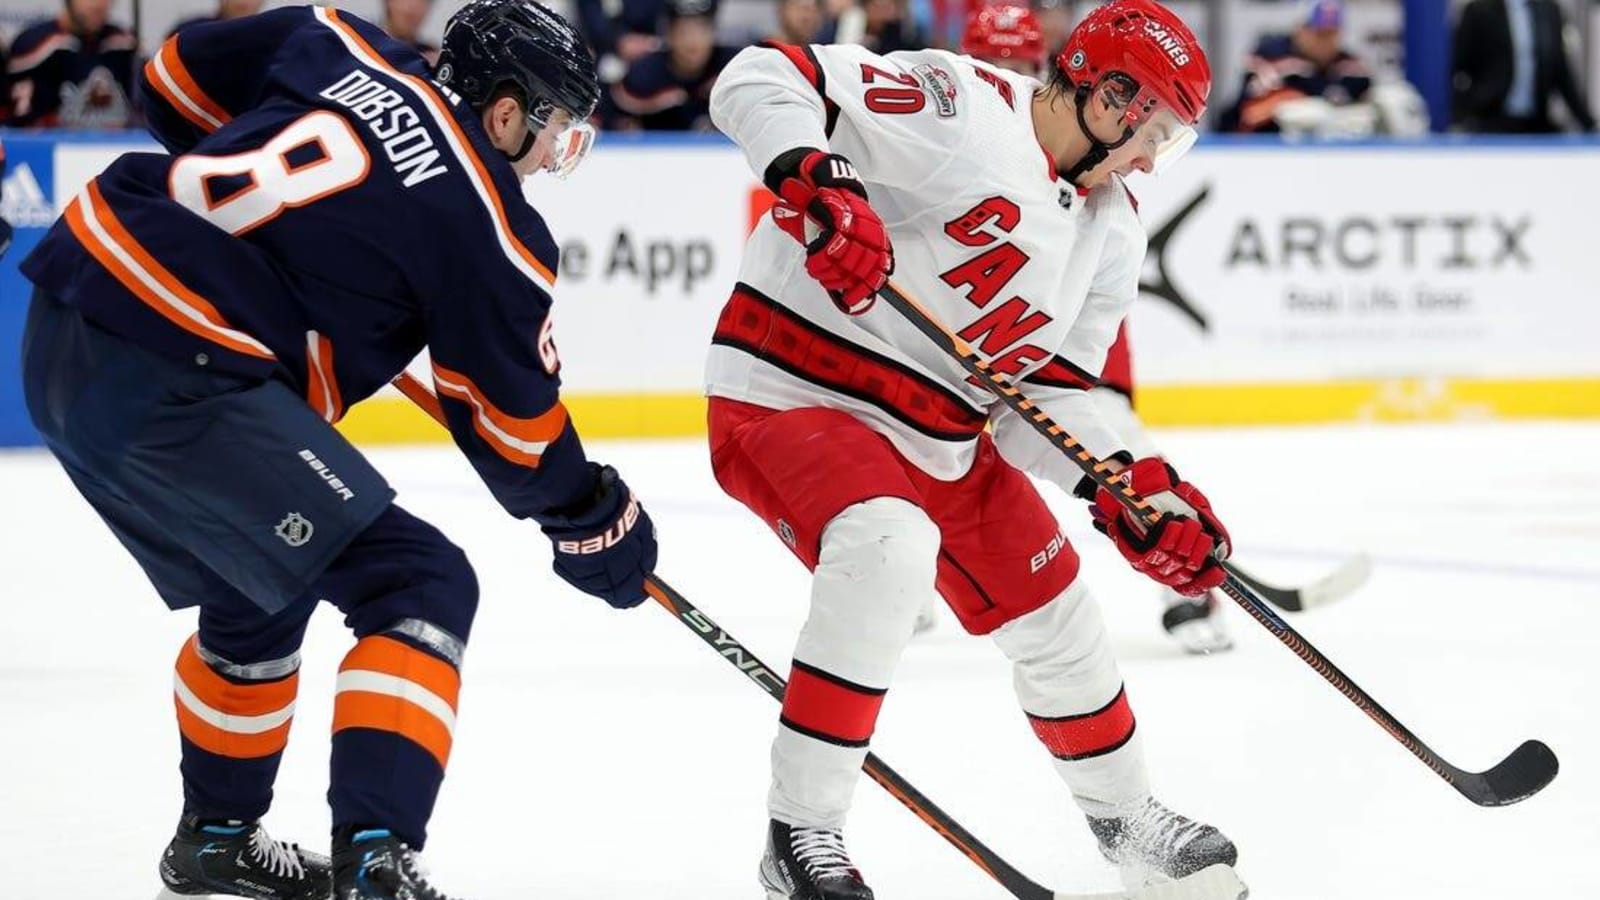 Sebastian Aho is ready to take another step with the Canes - Canes Country